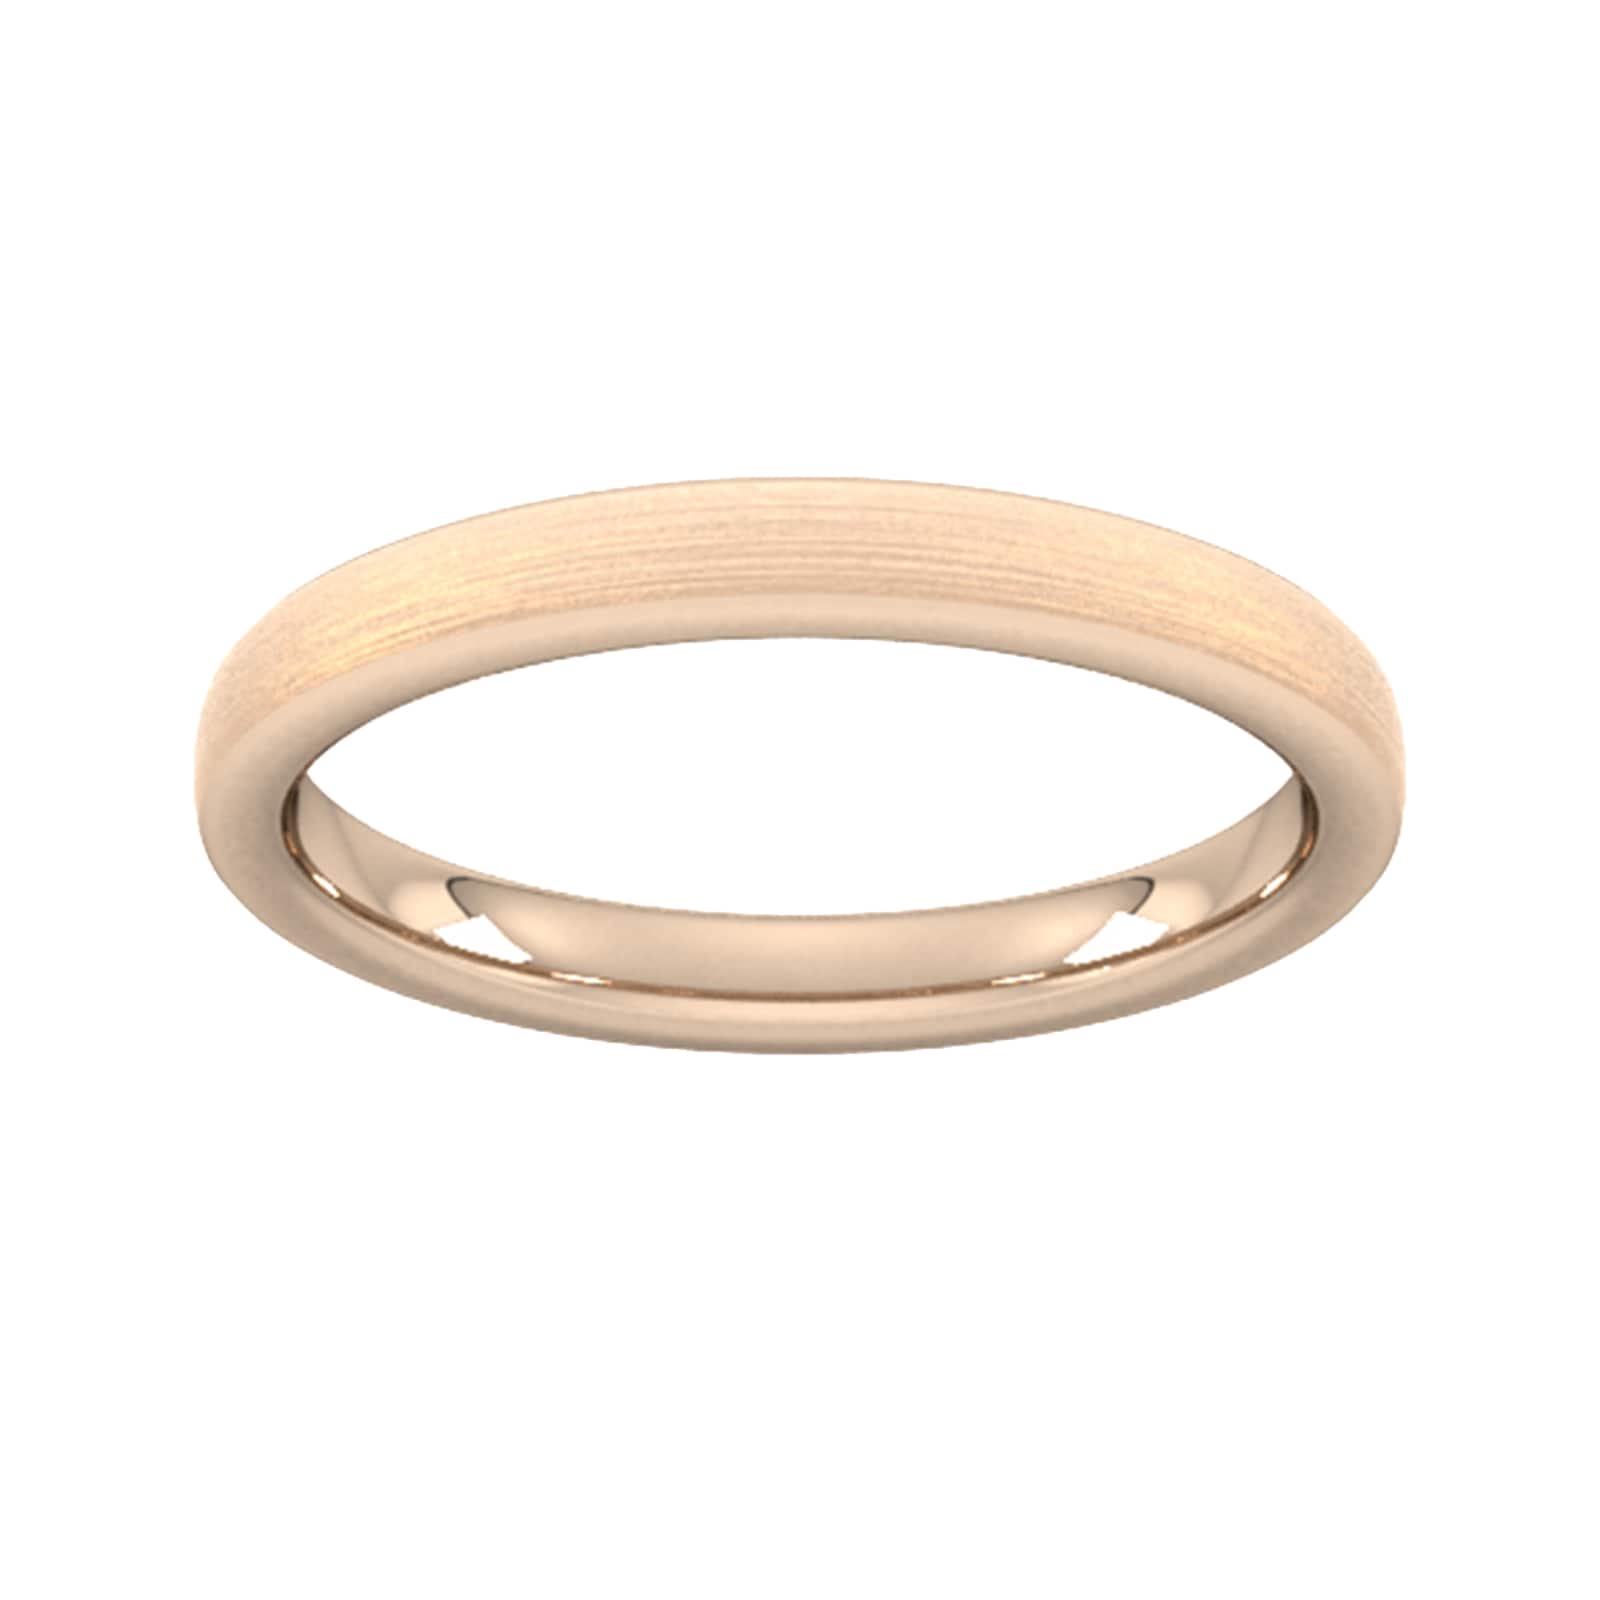 2.5mm D Shape Standard Polished Chamfered Edges With Matt Centre Wedding Ring In 18 Carat Rose Gold - Ring Size J